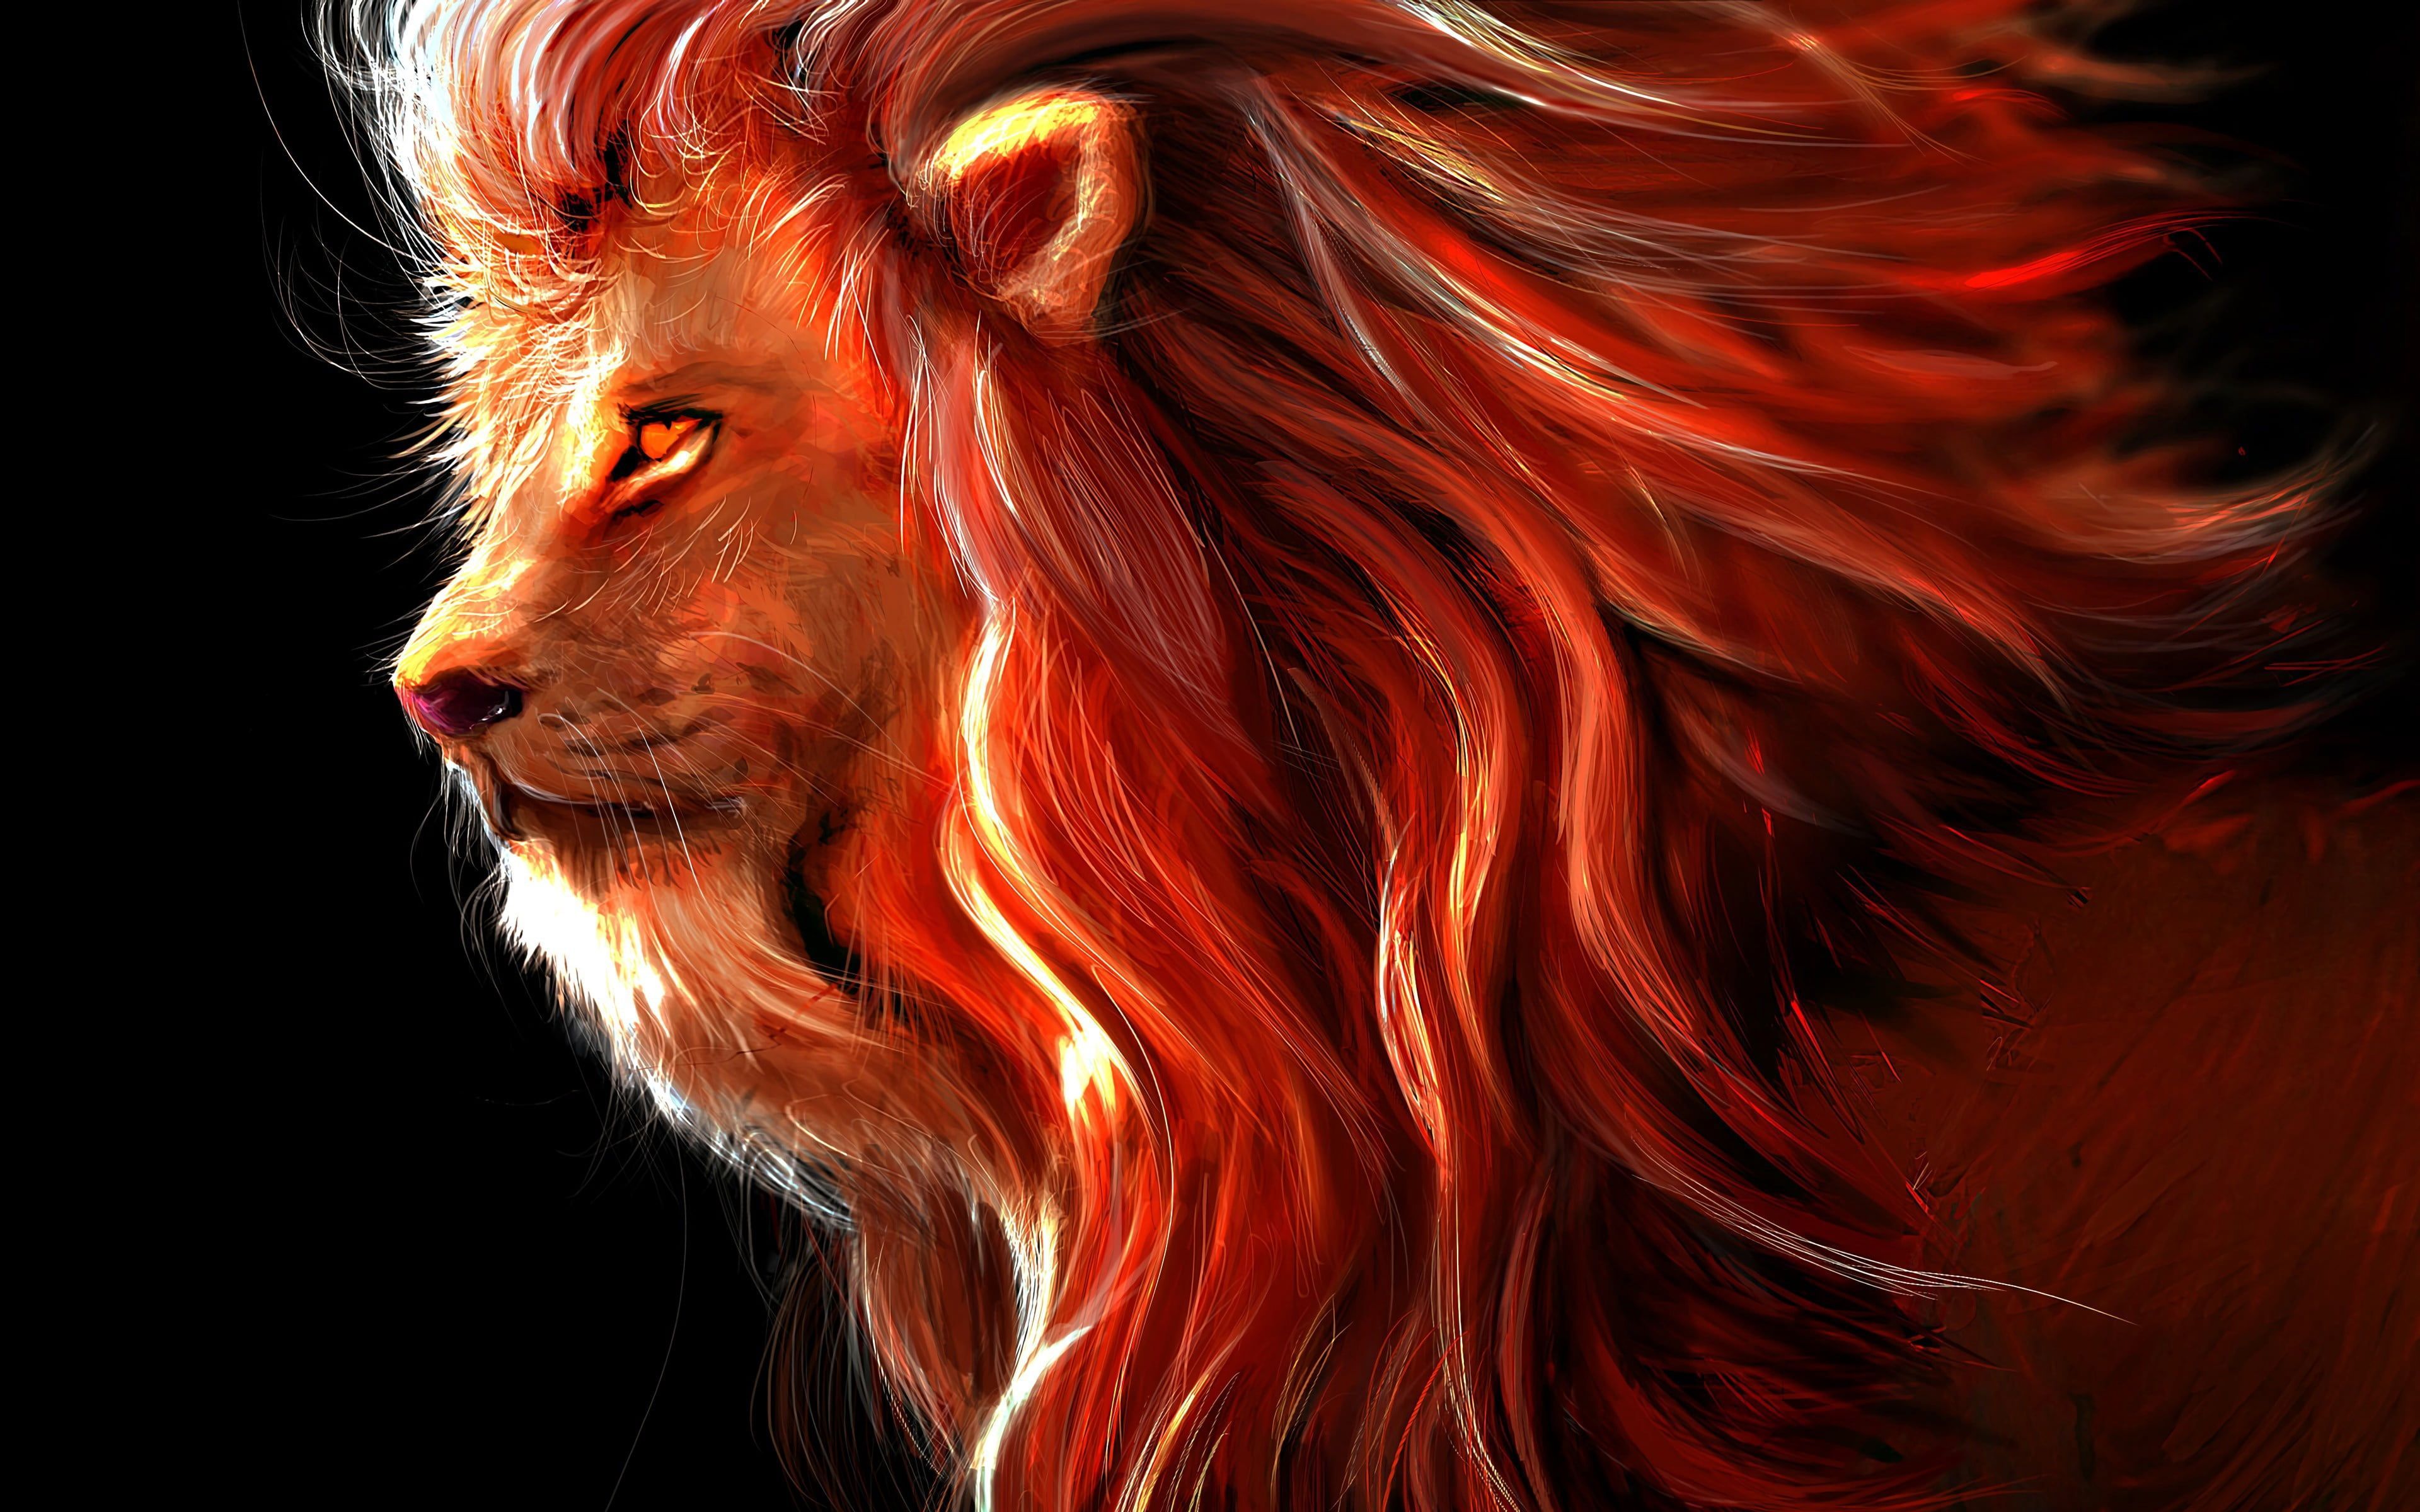 Lion Painting Ultra HD Wallpapers - Wallpaper Cave